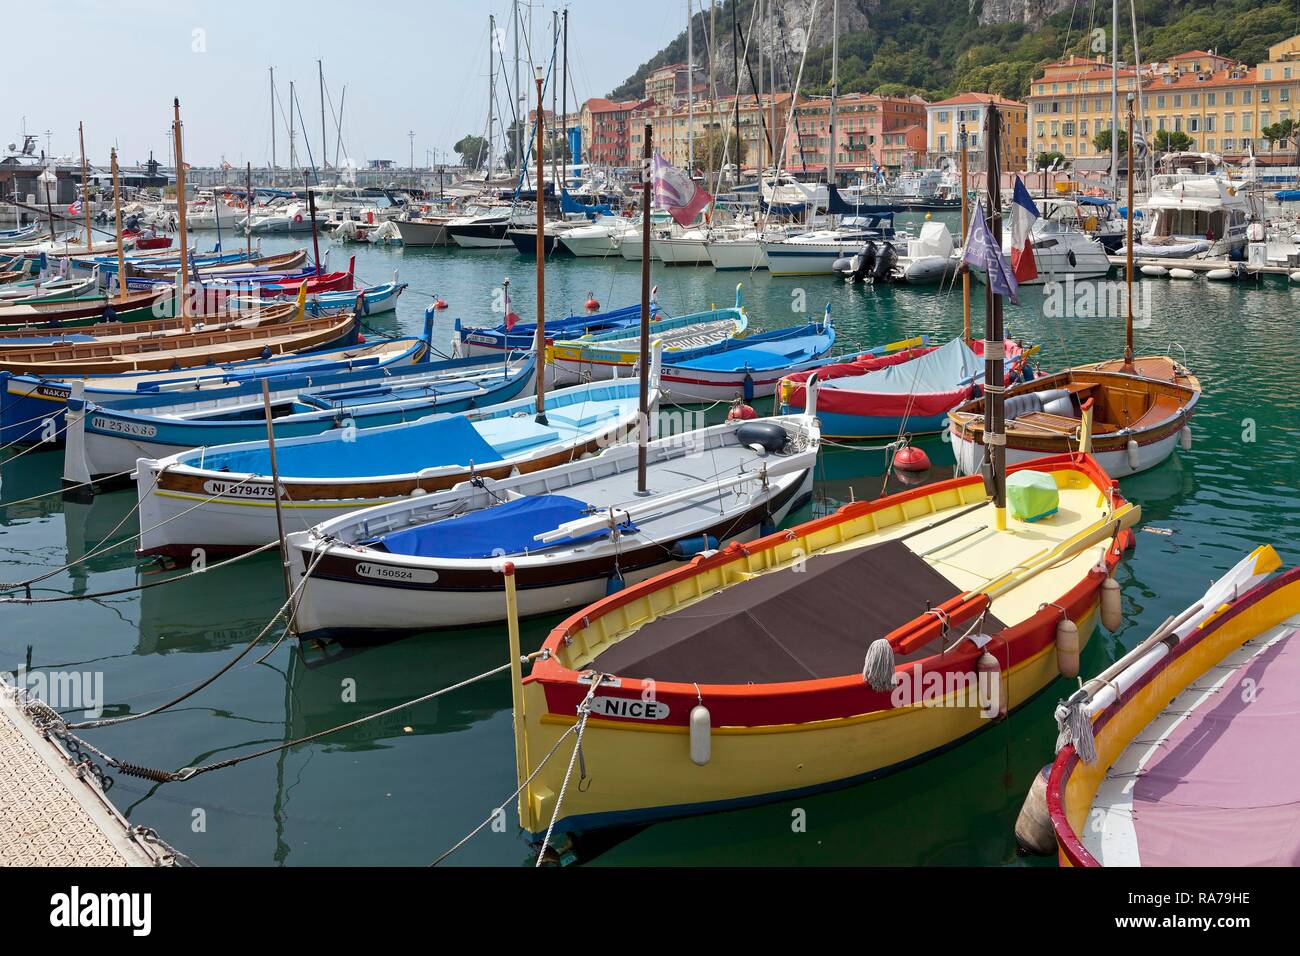 Traditional fishing boats in the harbour, Nice, Alpes-Maritimes, Provence-Alpes-Côte d'Azur, France Stock Photo